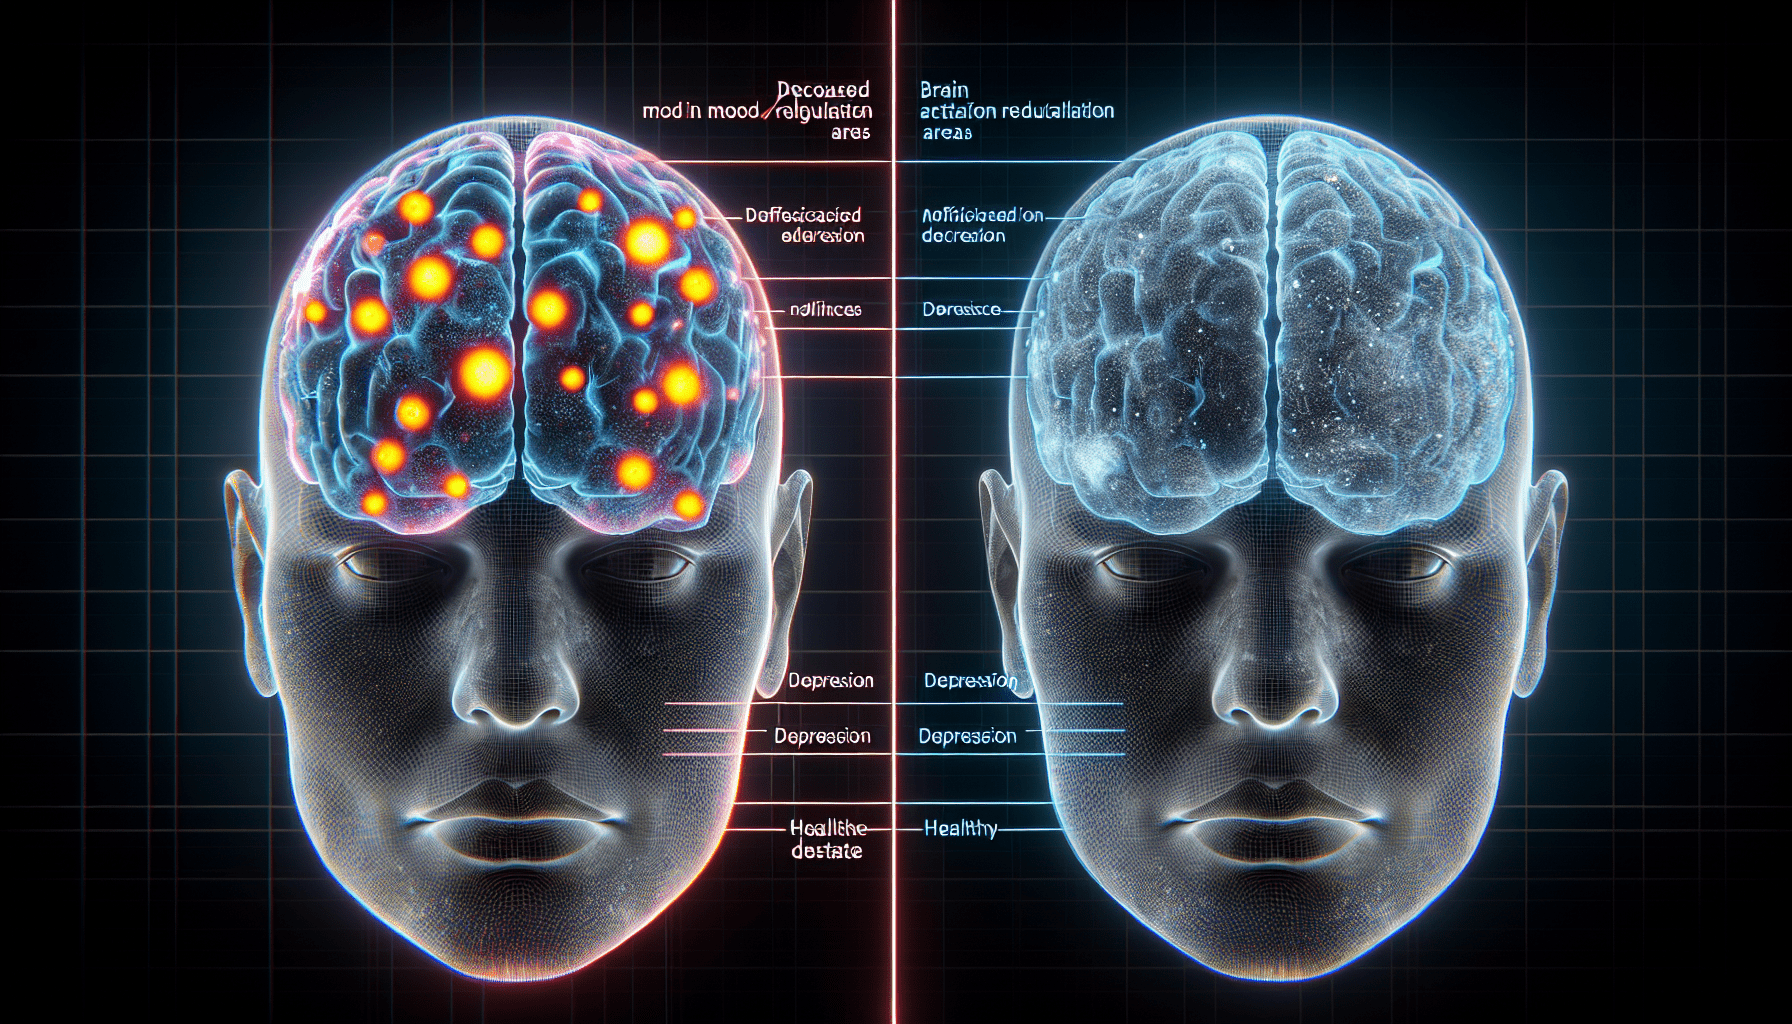 What Is The Difference Between A Depressed Brain And A Normal Brain?